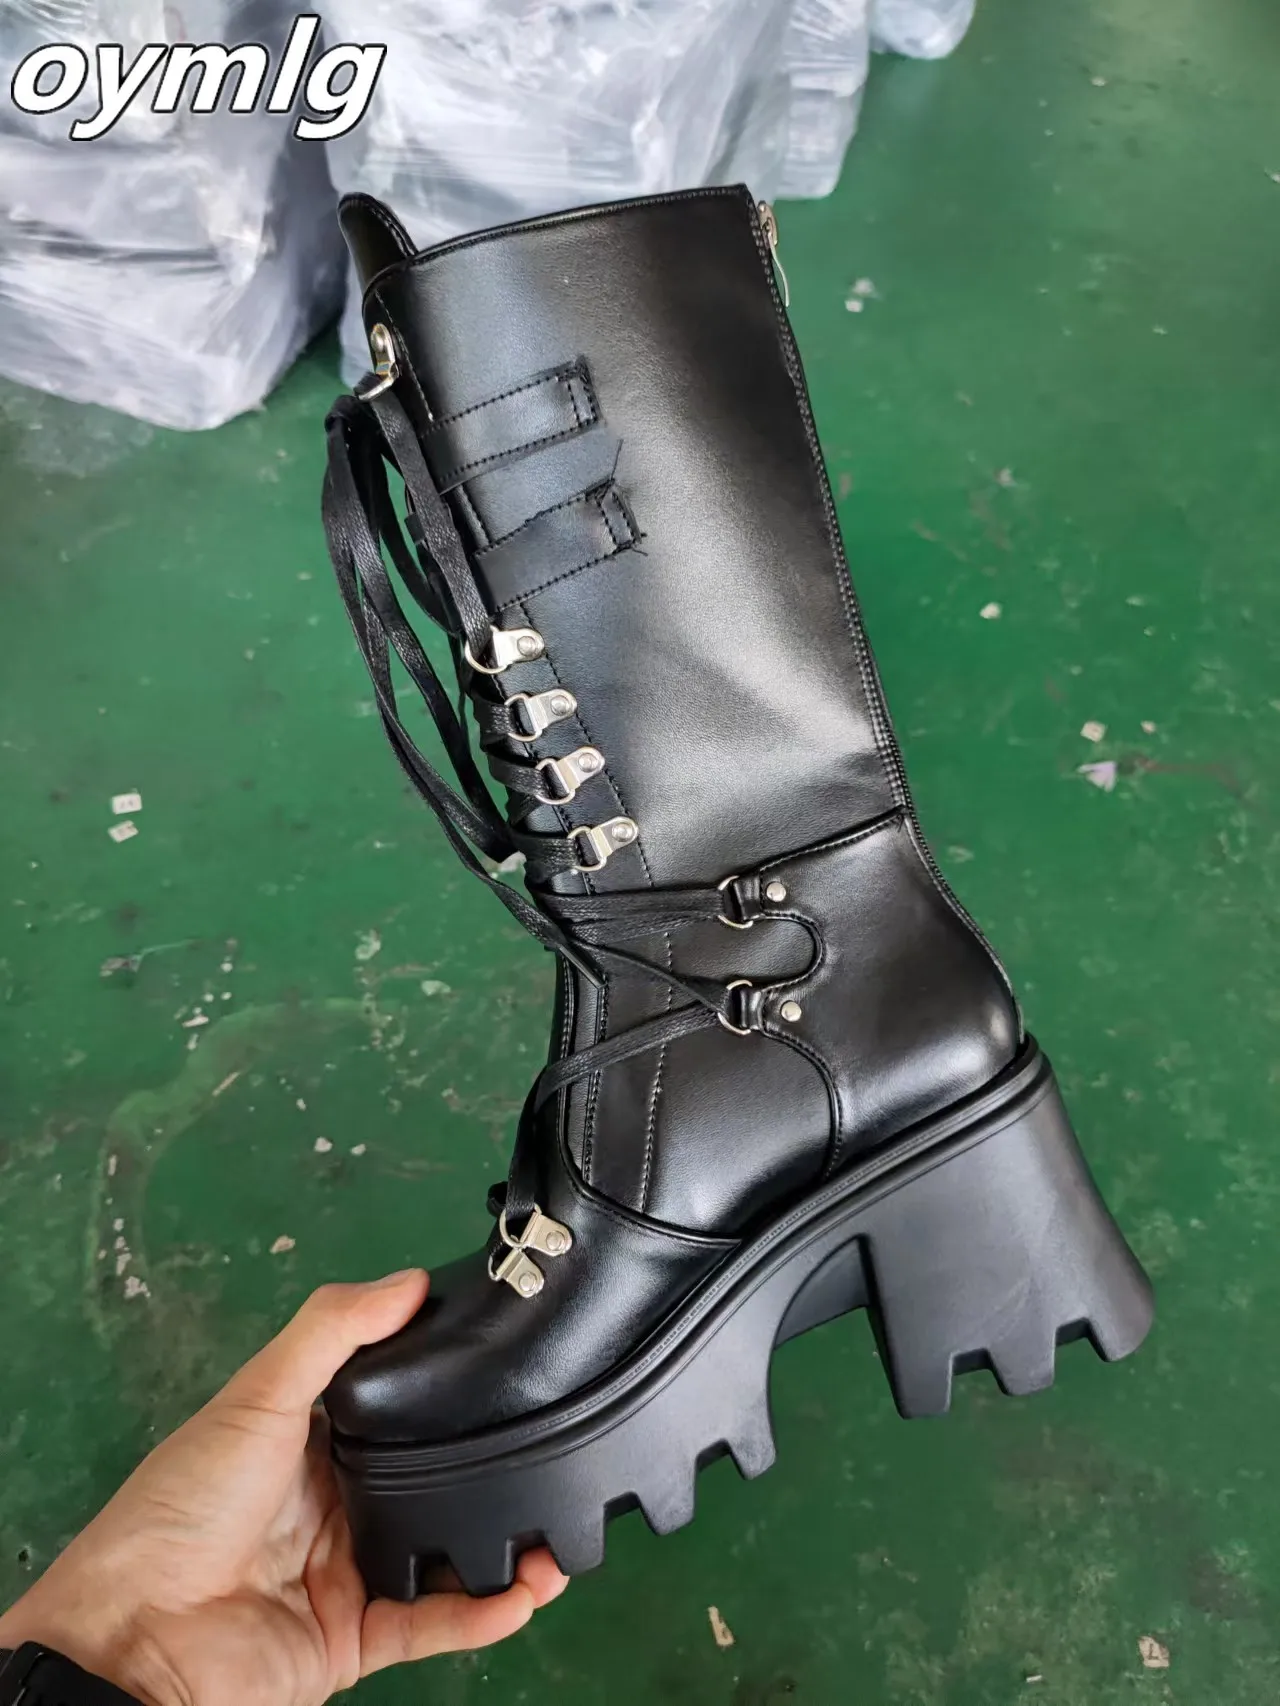 

2022 Winter Punk Rock Style Gothic Cosplay Motorcycle Biker Combat Mid Calf Boots Platform Shoes Chunky High Heels 35-43